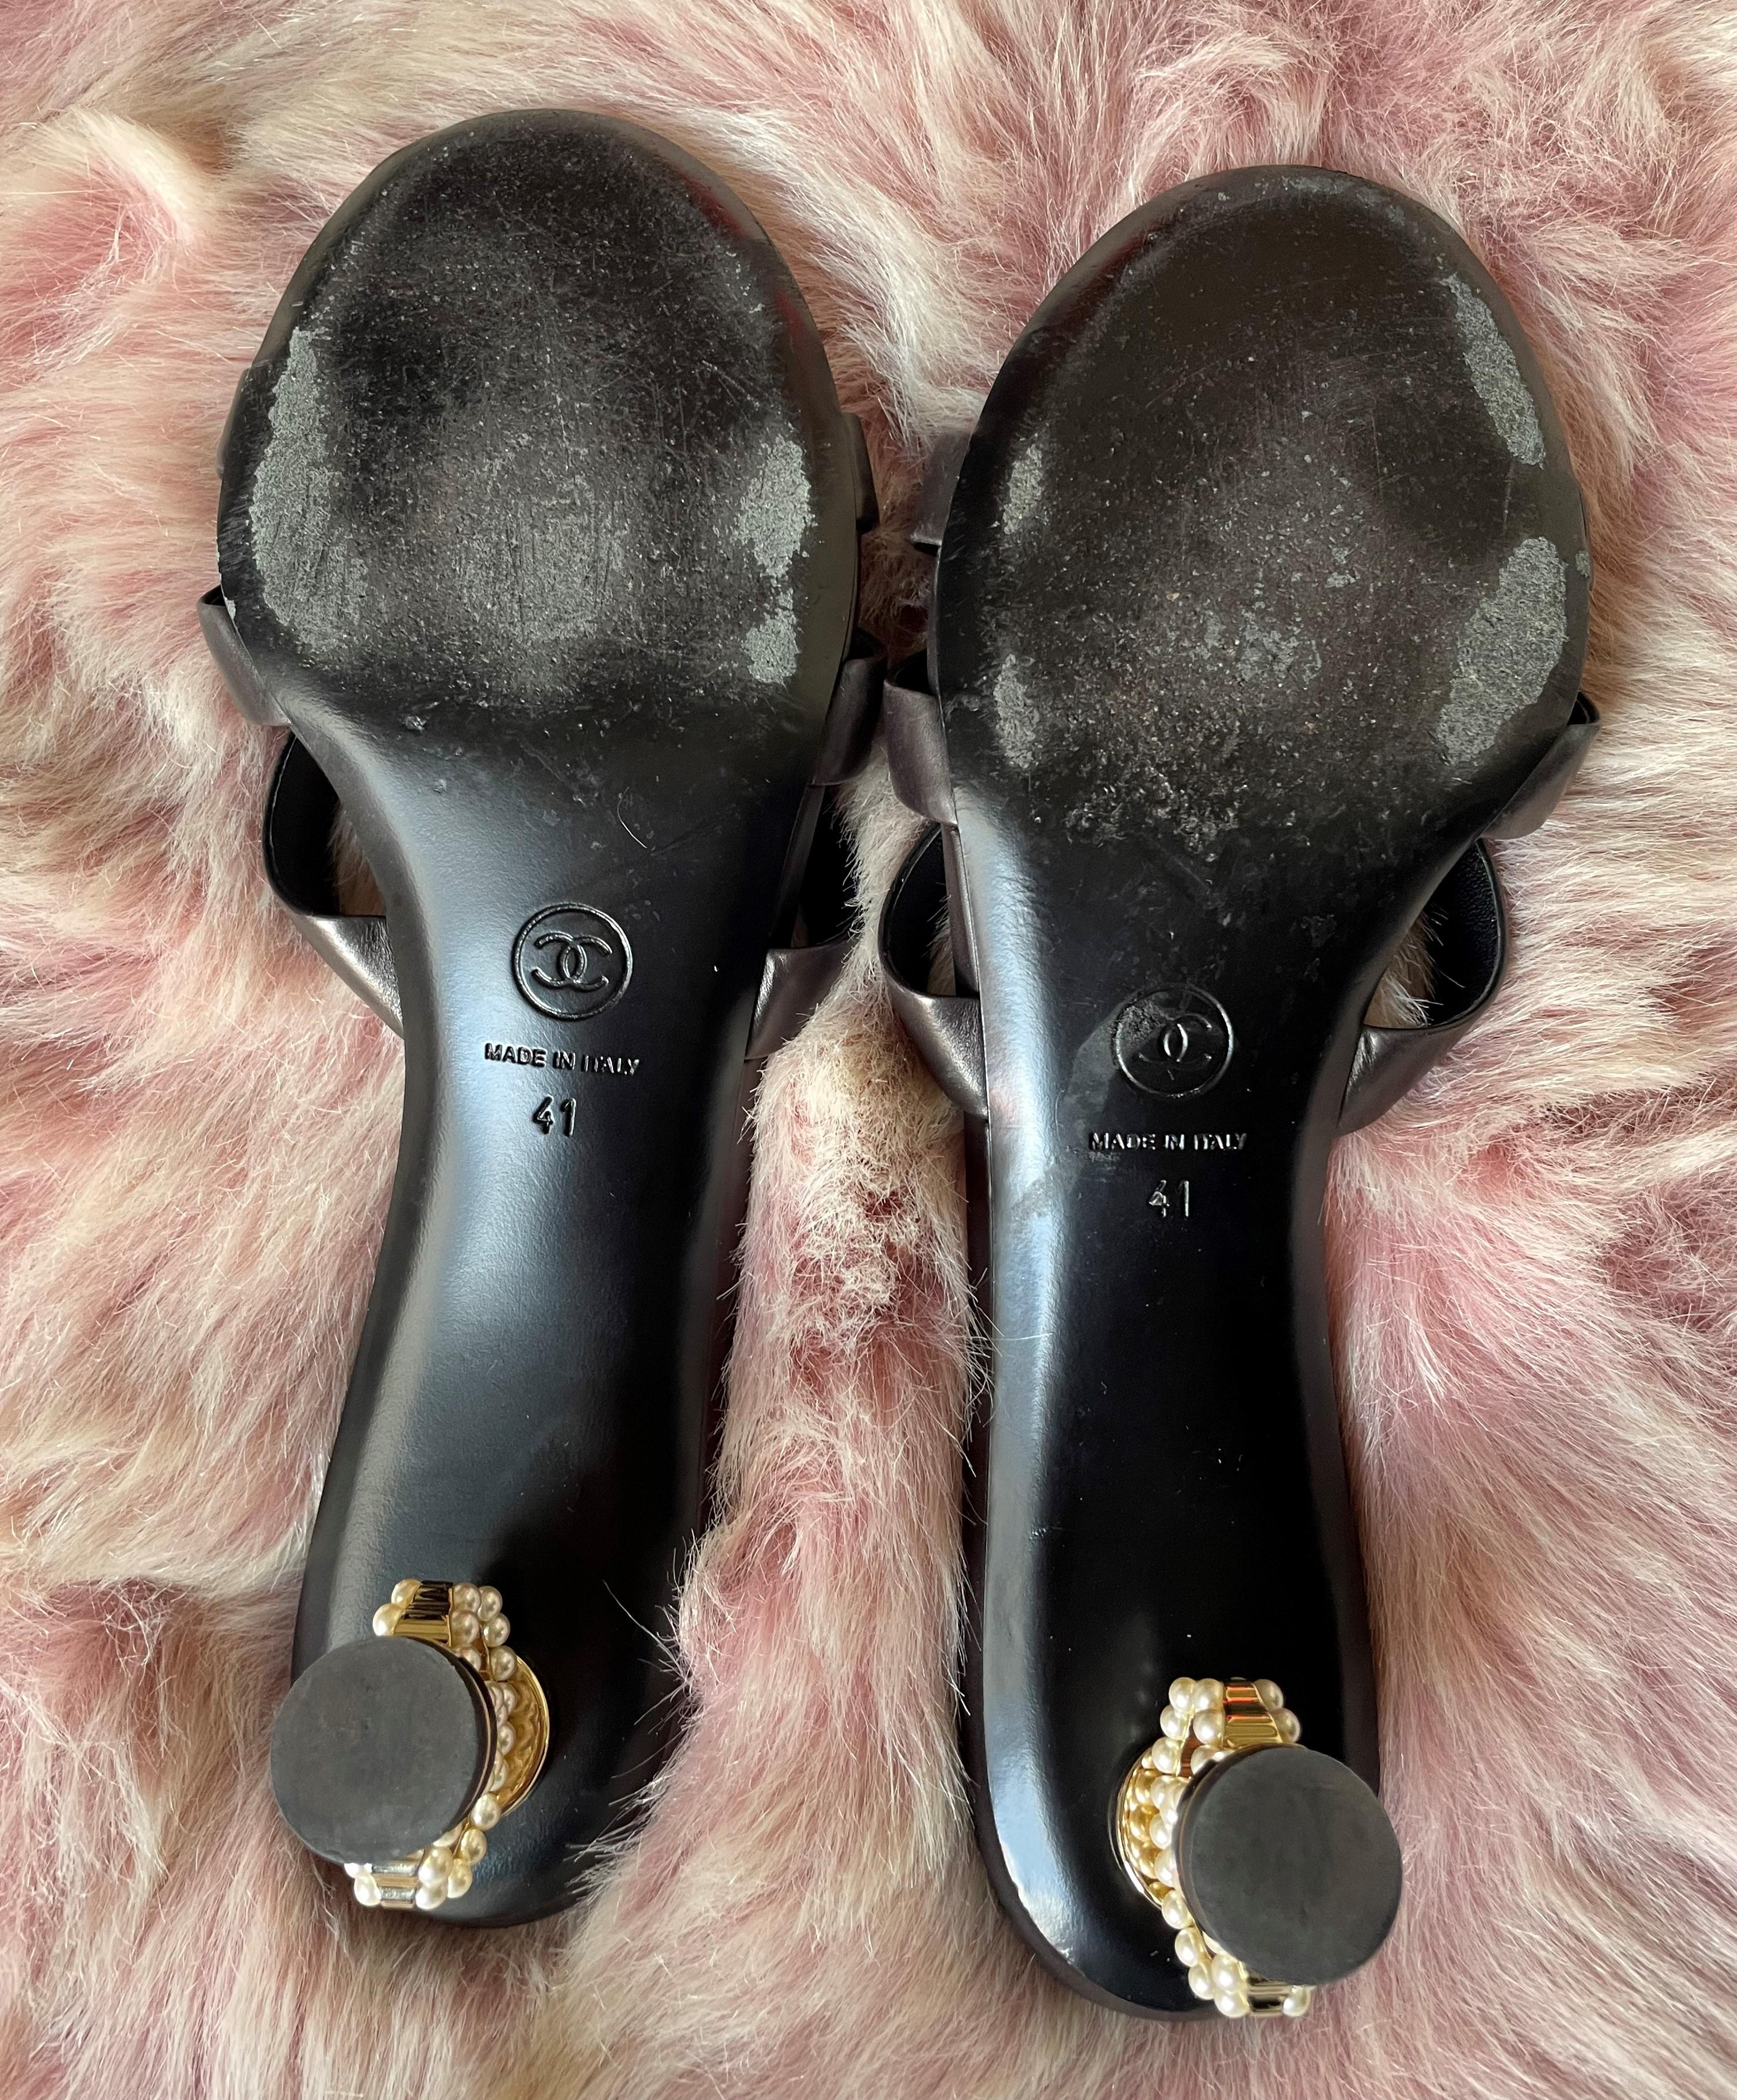 chanel pearl mules